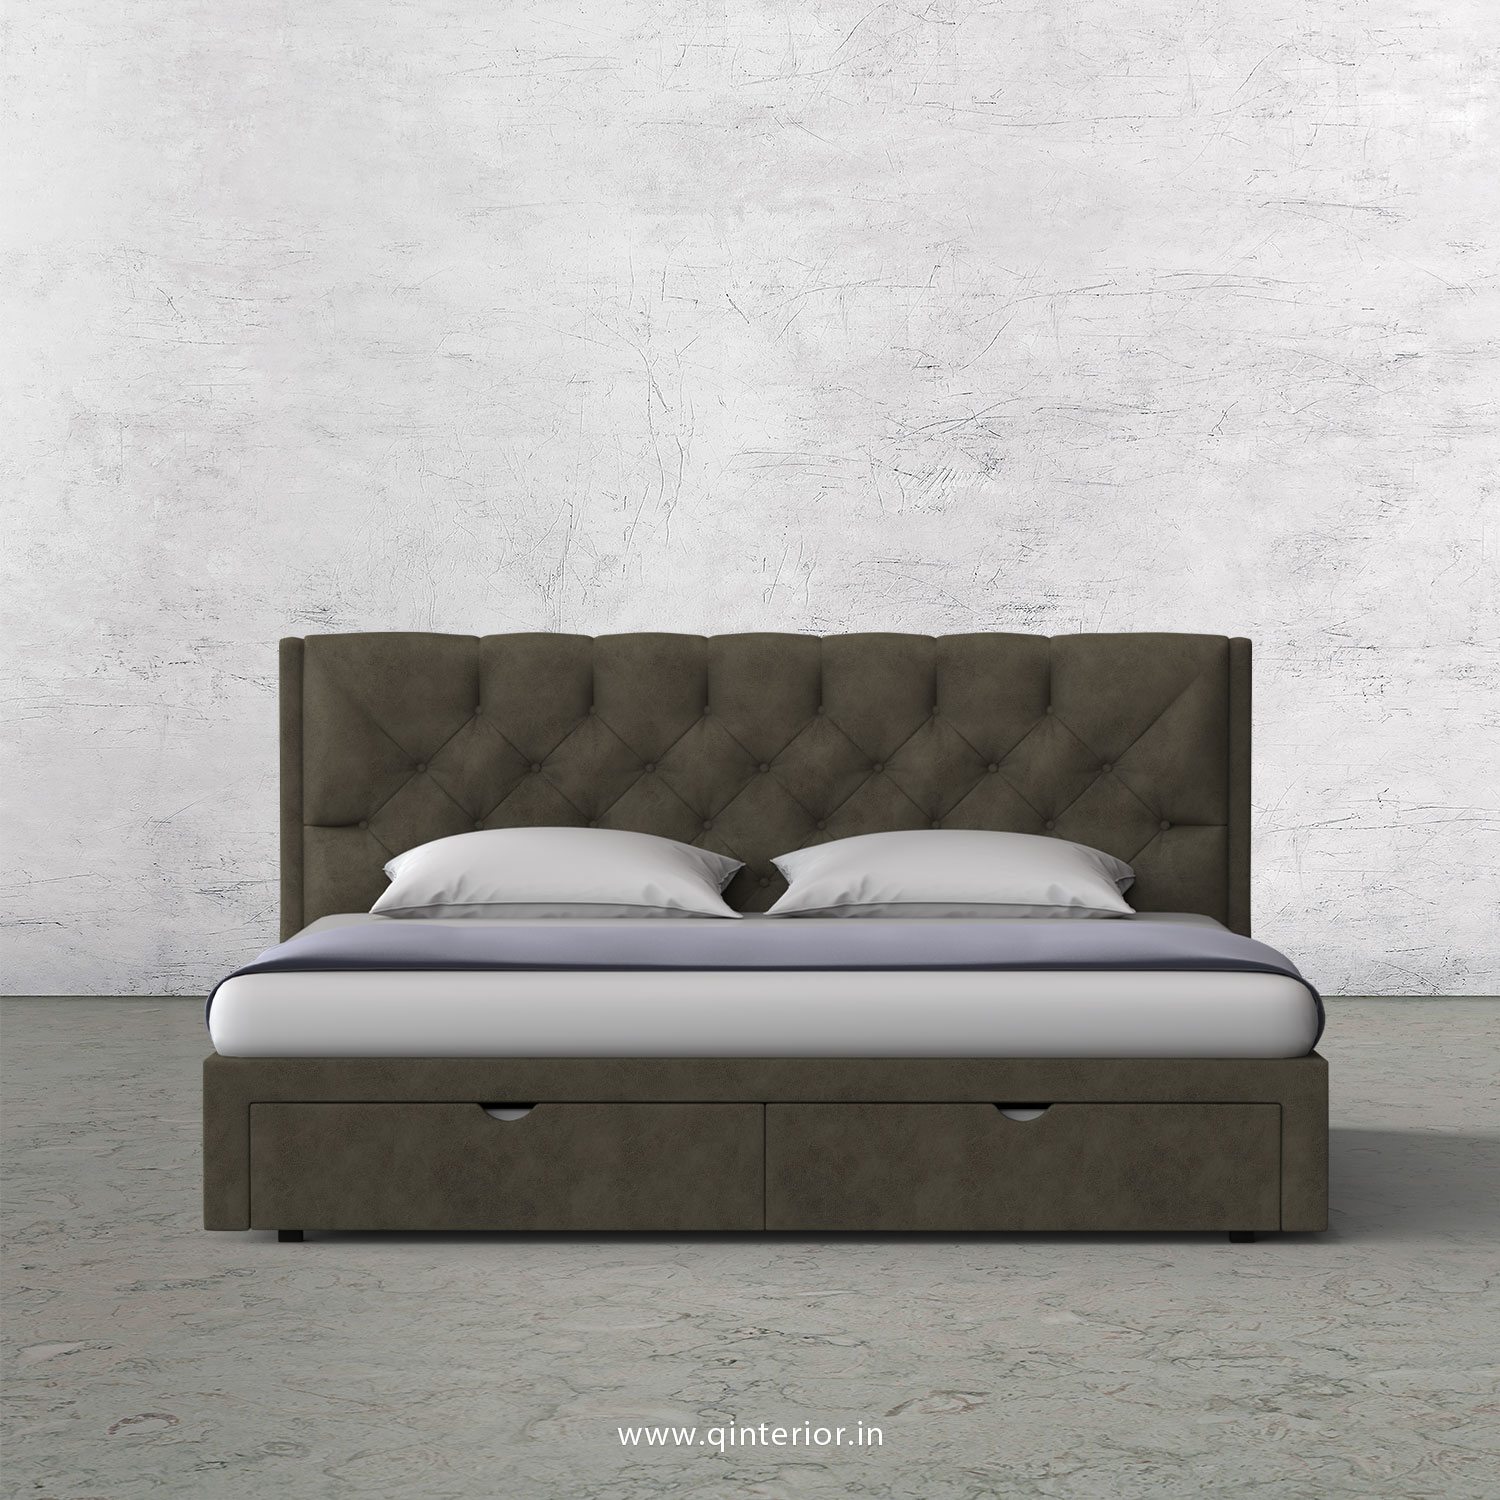 Scorpius King Size Storage Bed in Fab Leather Fabric - KBD001 FL03